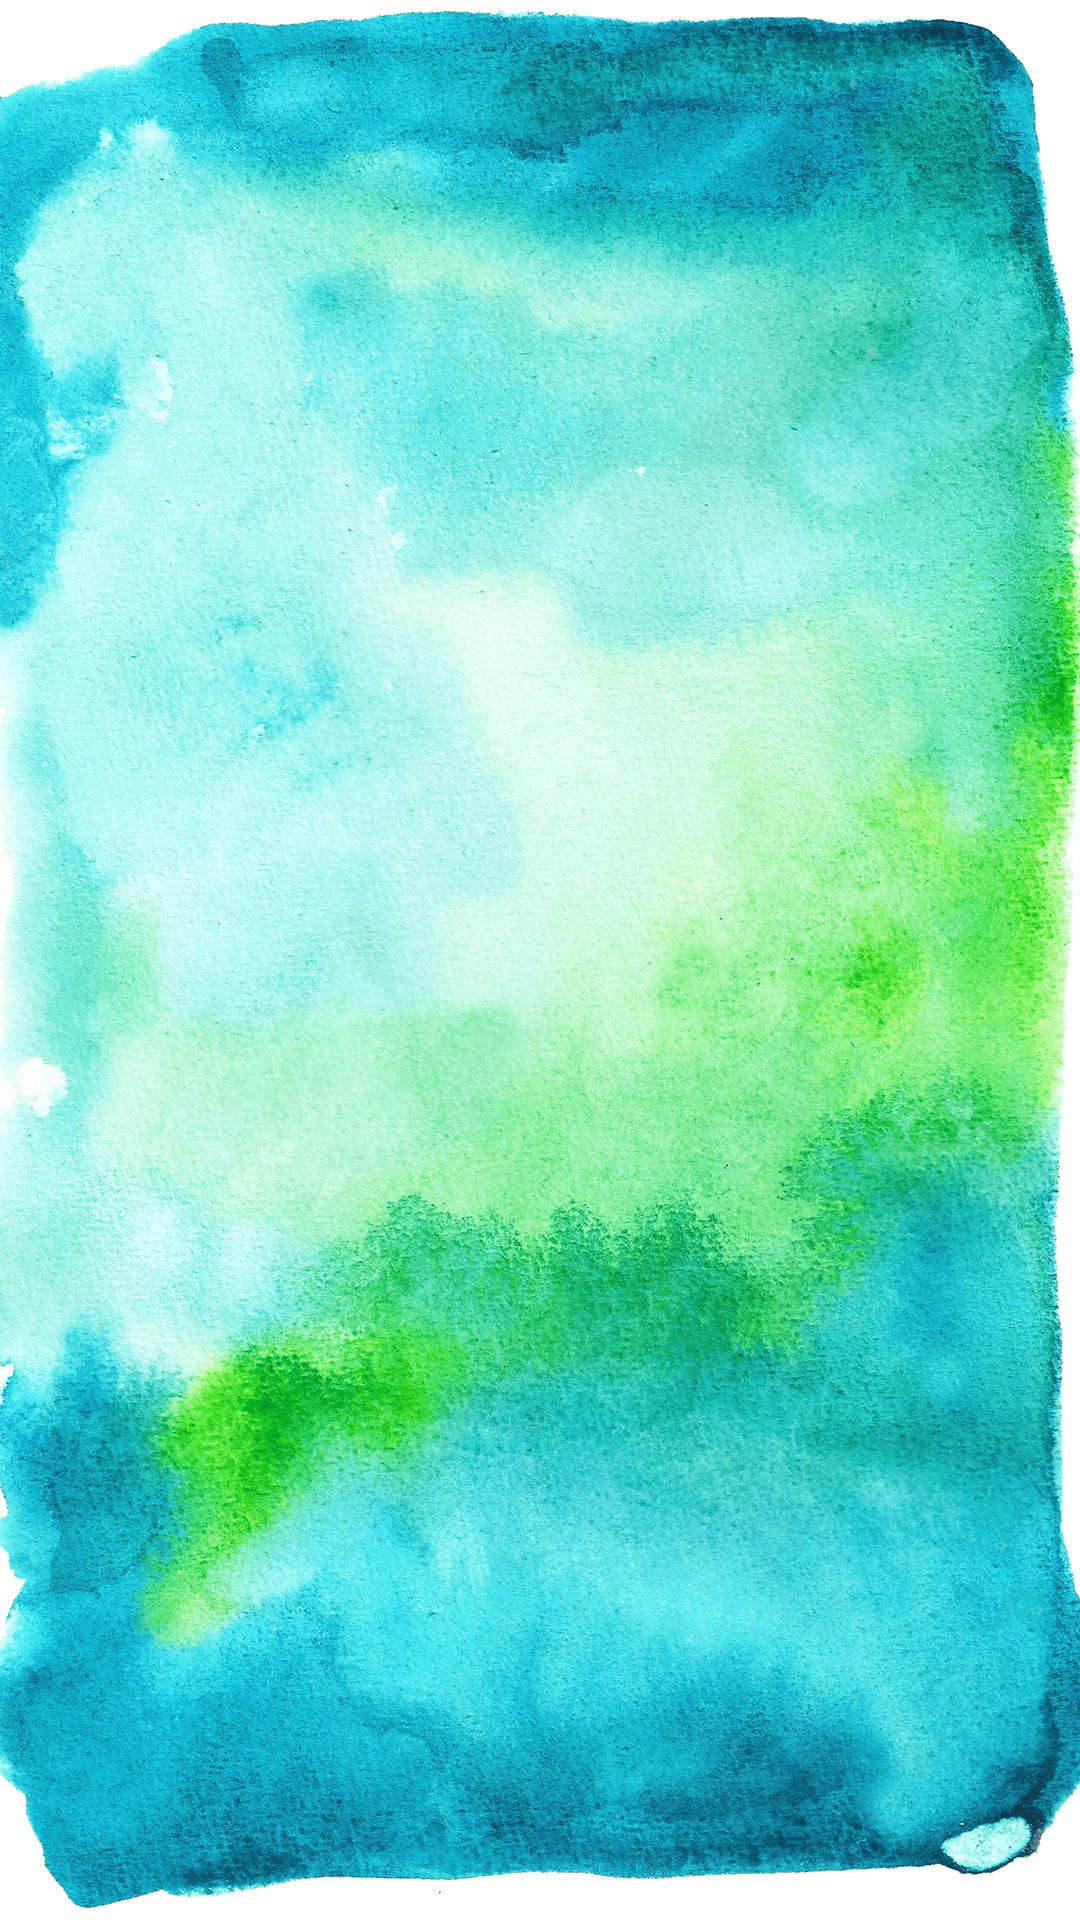 Watercolor 1080X1920 Wallpaper and Background Image